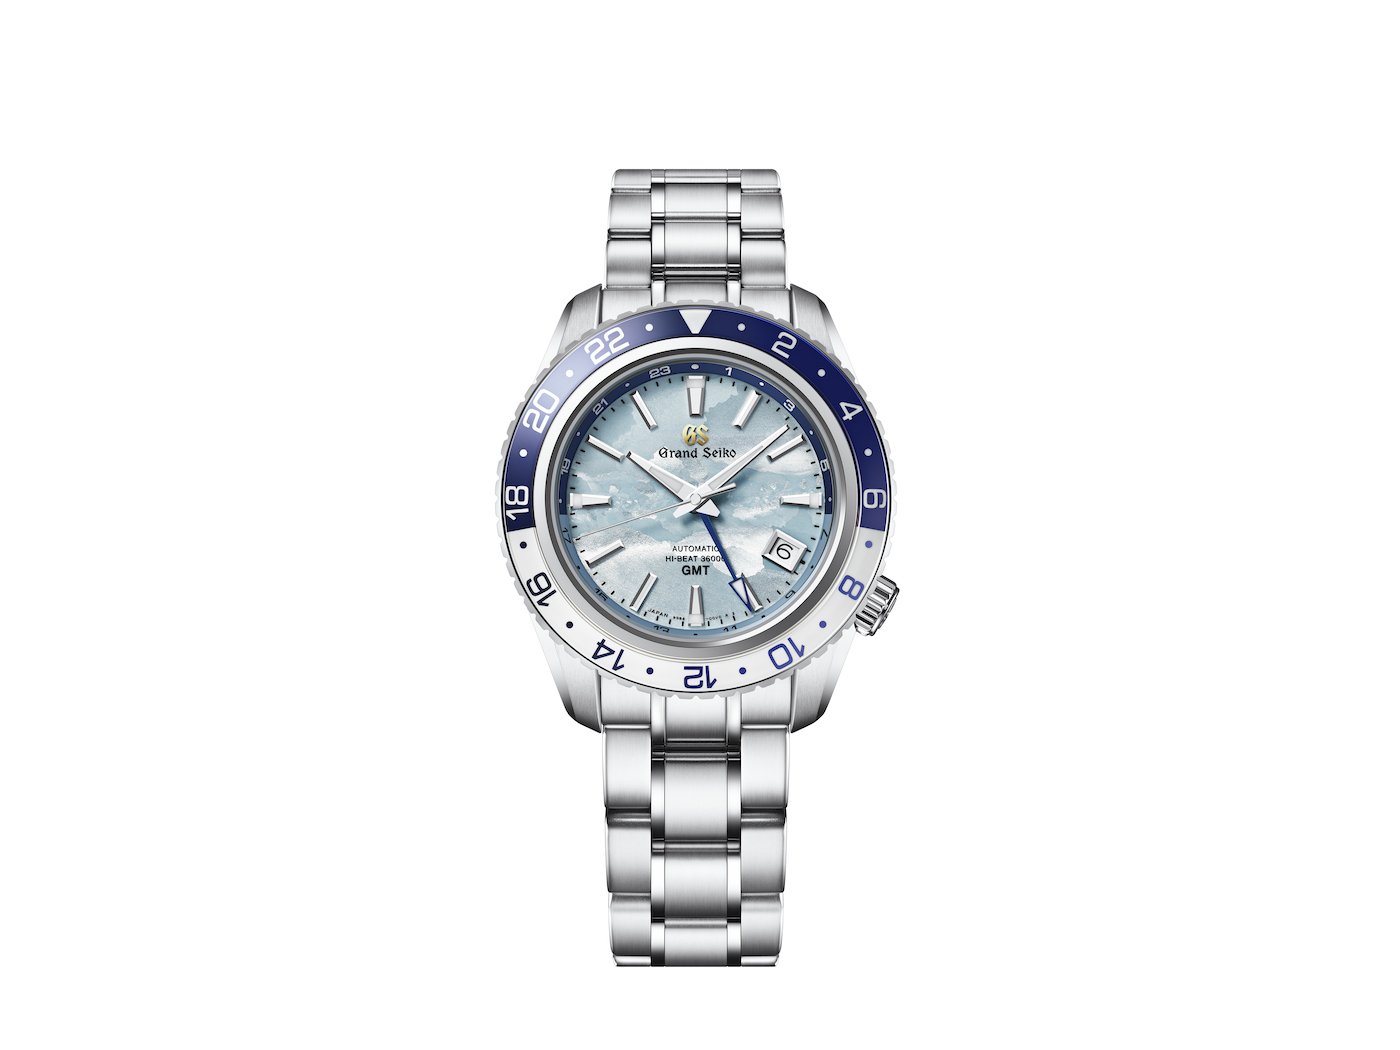 Grand Seiko releases new GMT models for Calibre 9S 25th anniversary limited edition